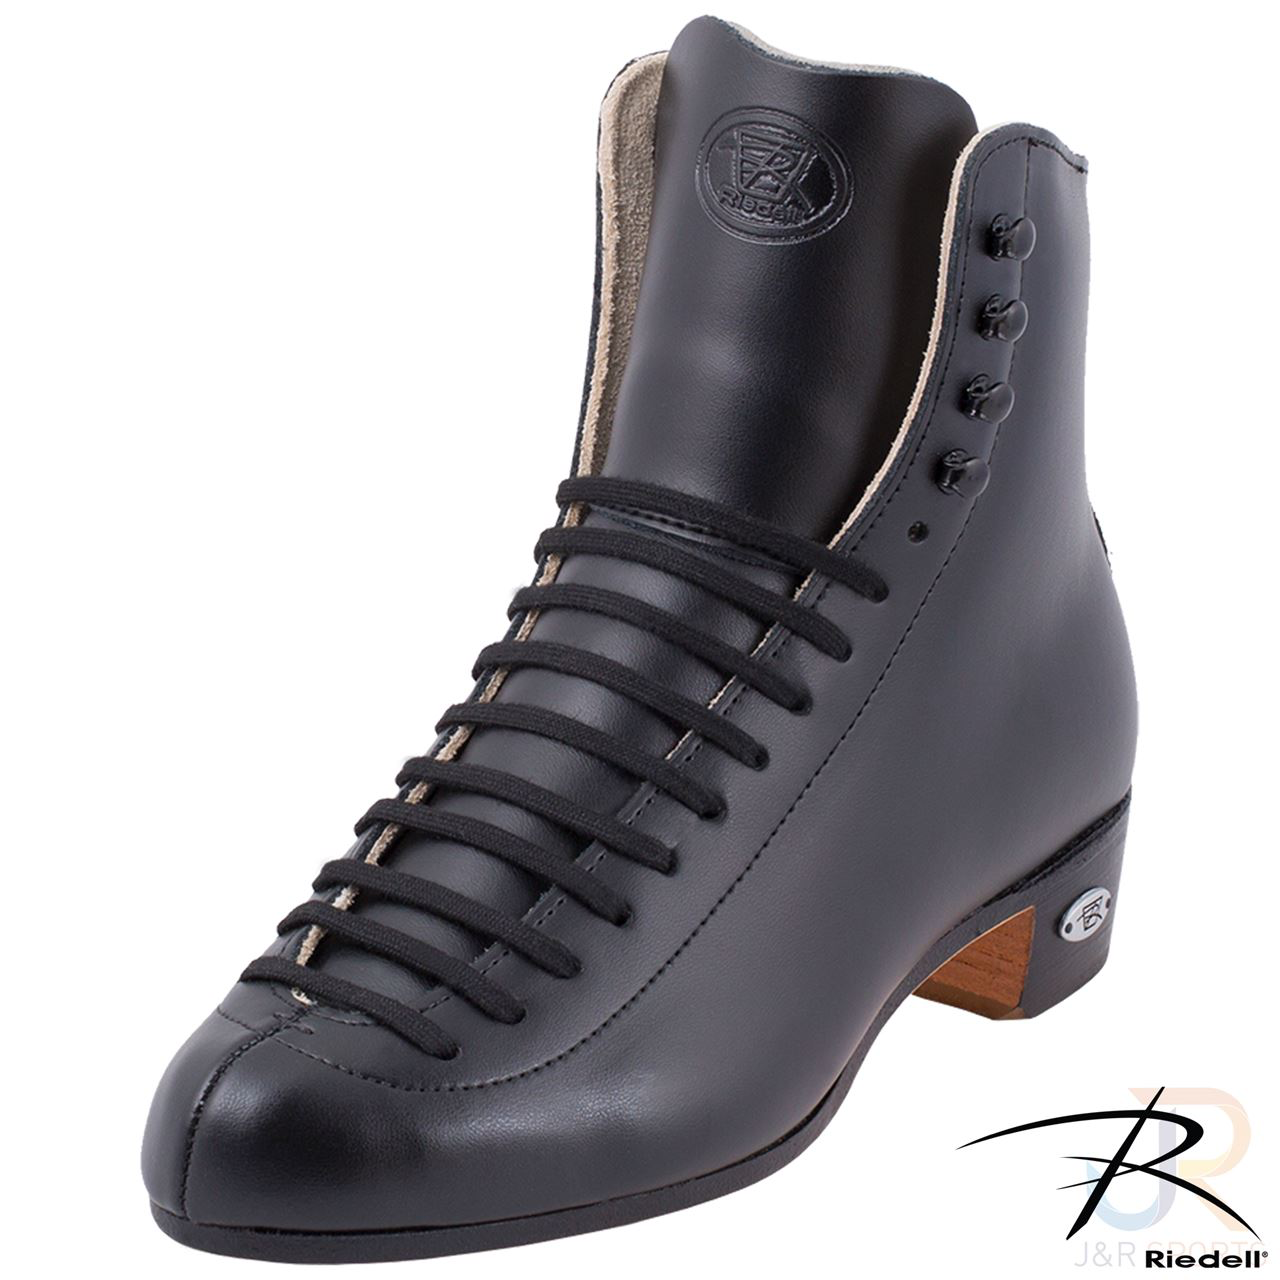 Riedell 220 Retro High Top Skate Boots - Black